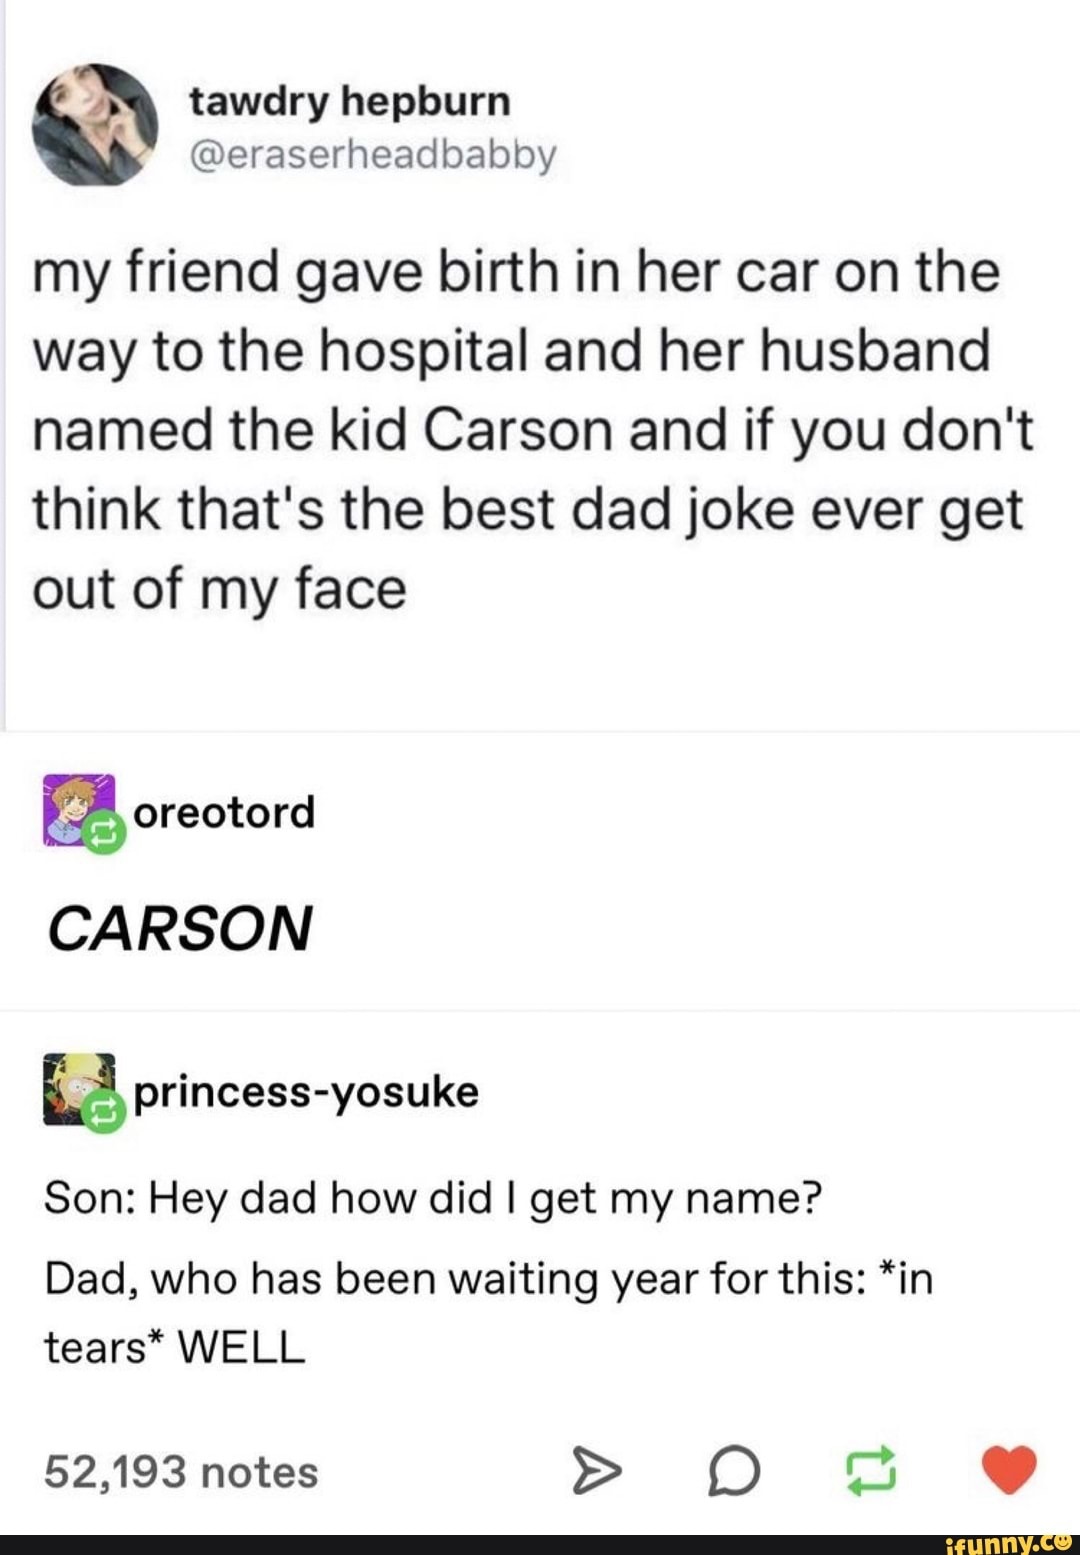 document - tawdry hepburn my friend gave birth in her car on the way to the hospital and her husband named the kid Carson and if you don't think that's the best dad joke ever get out of my face L oreotord Carson princessyosuke Son Hey dad how did I get my